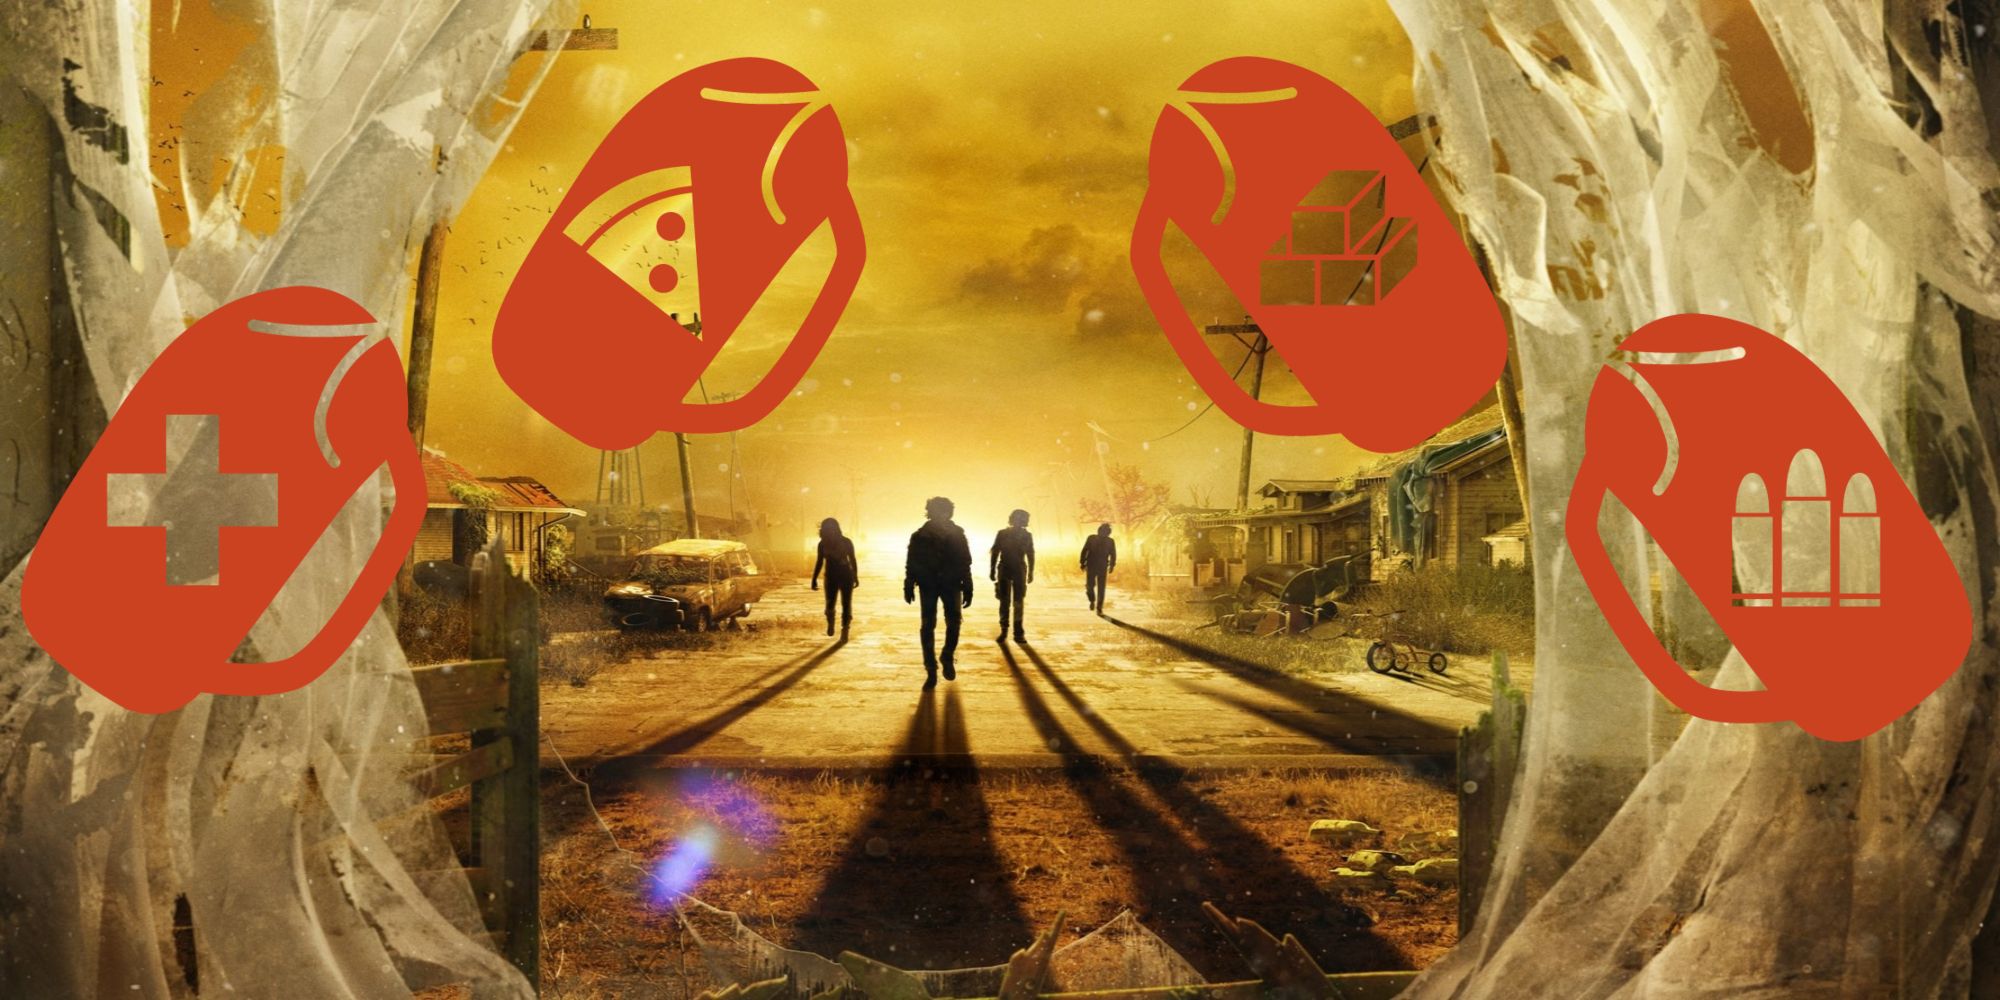 State of Decay 2 Community Rucksacks and official art